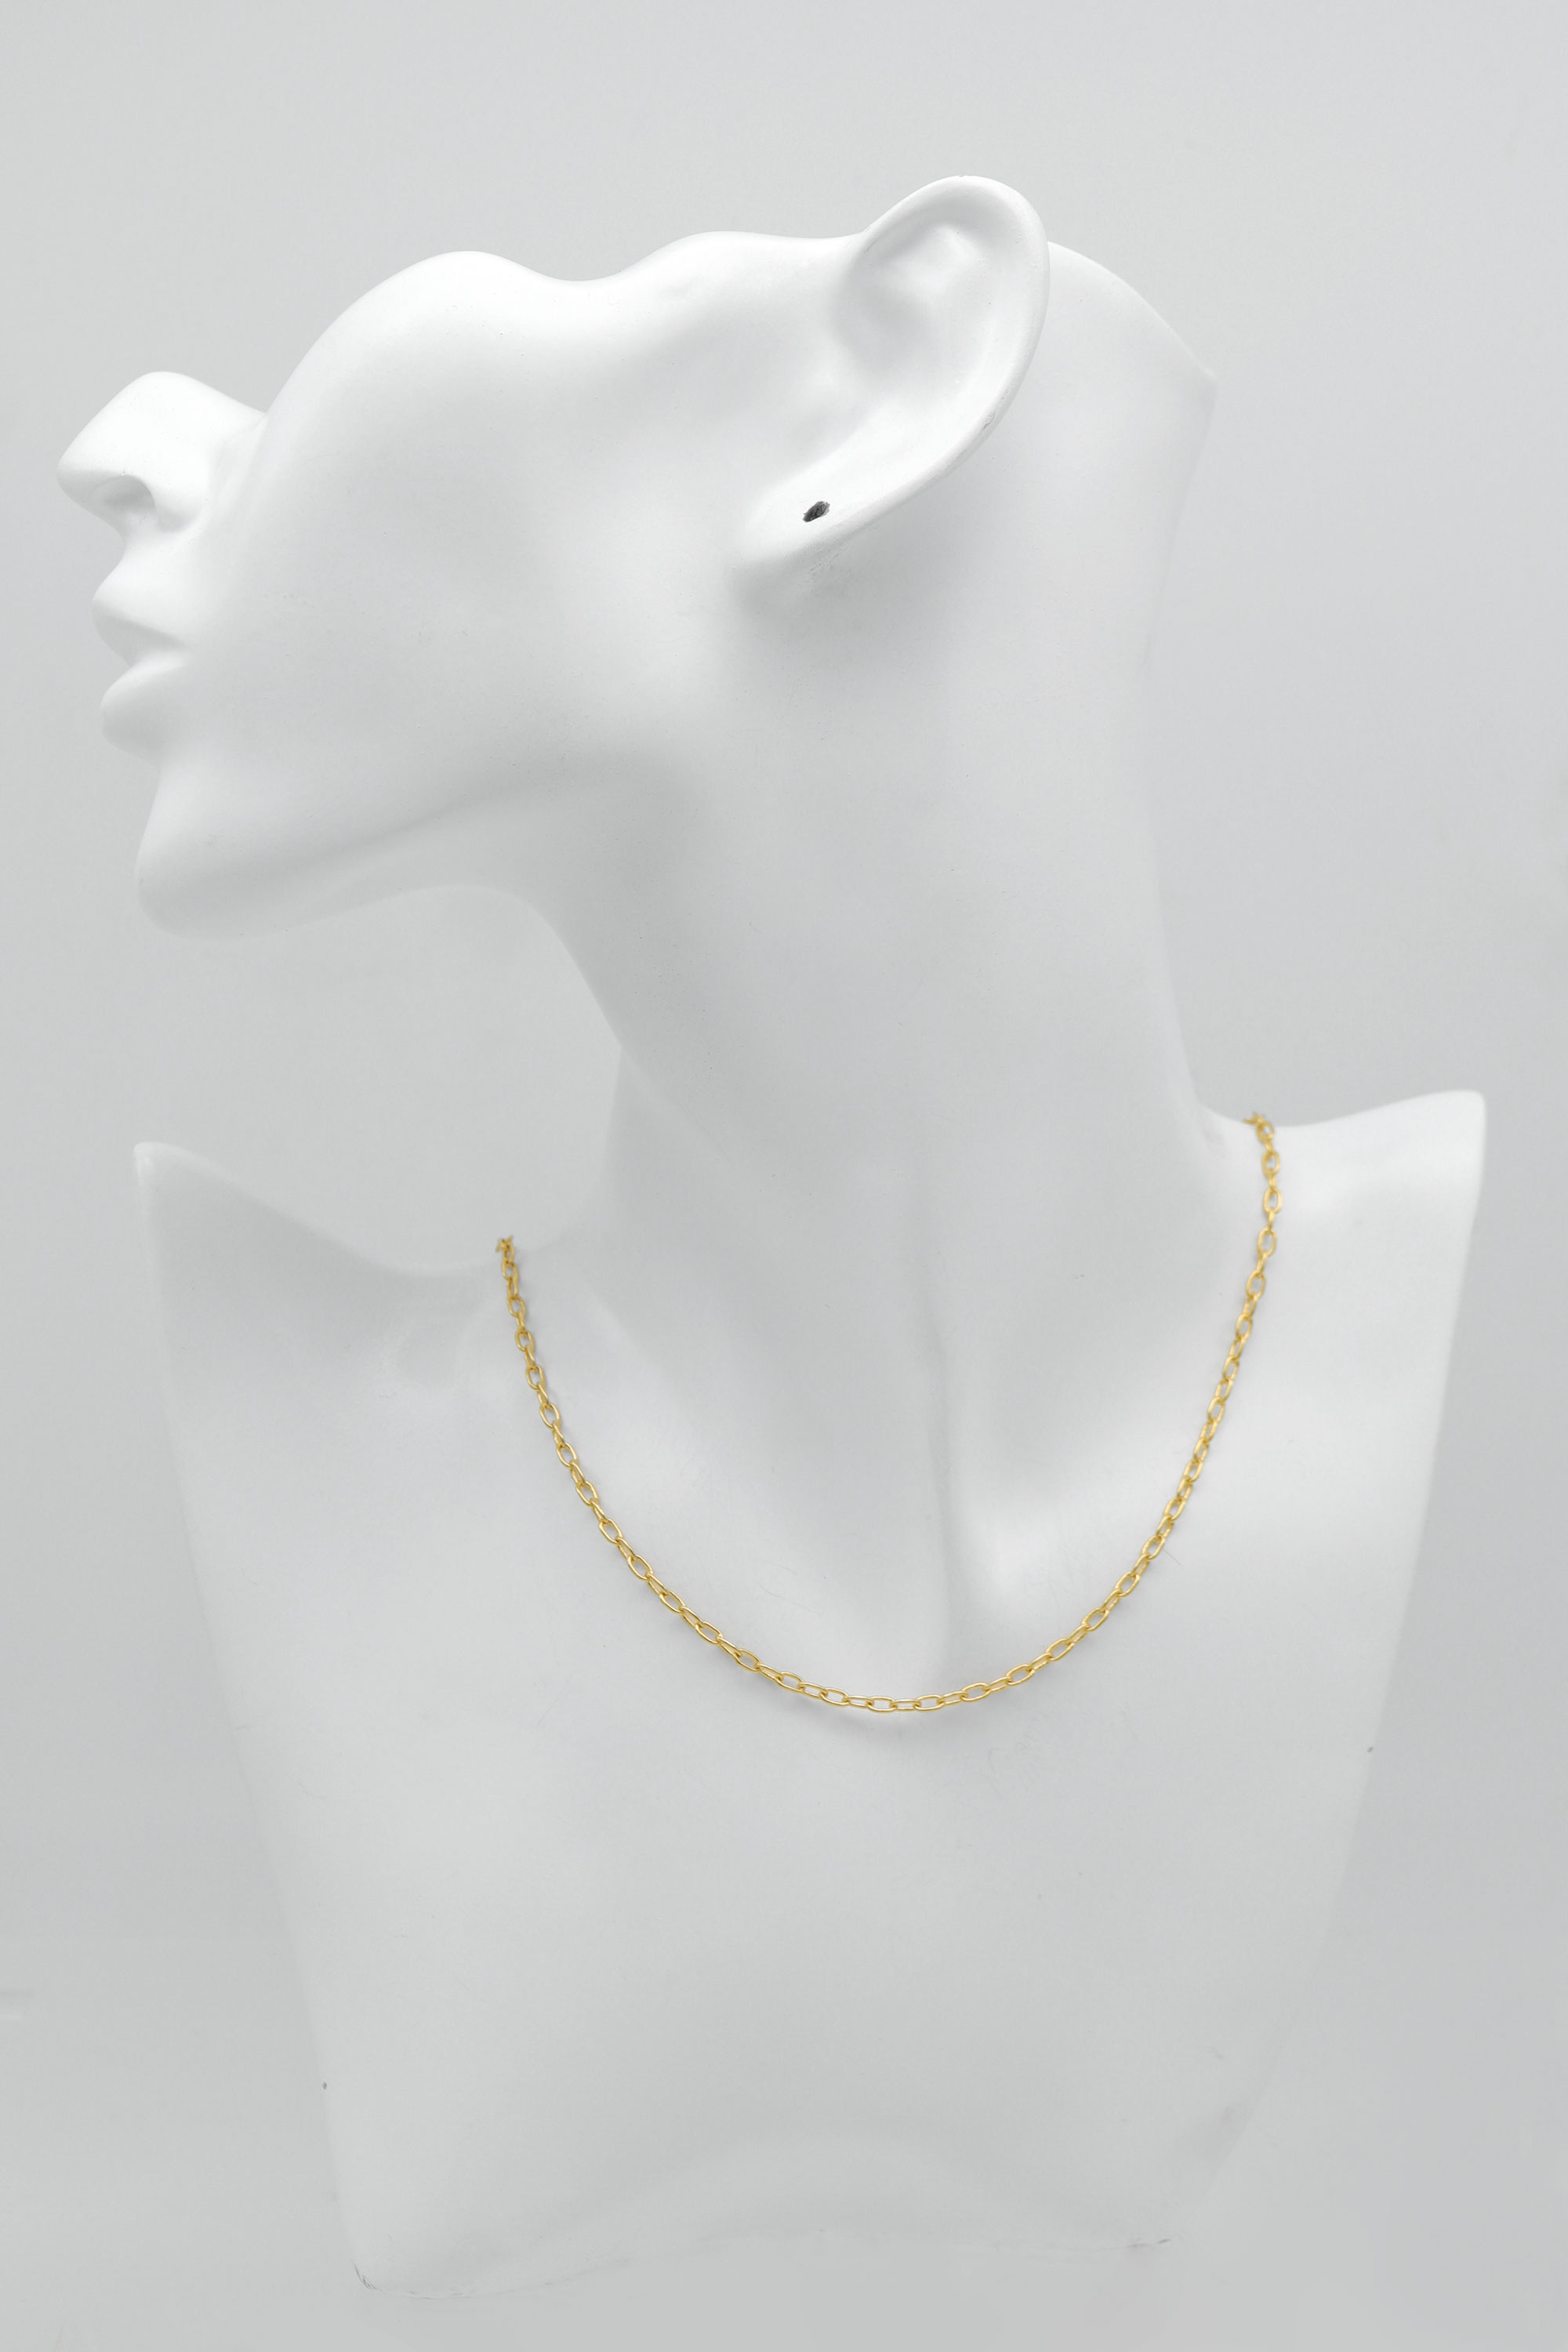 Oval link chain necklace for charm, N4506-G1